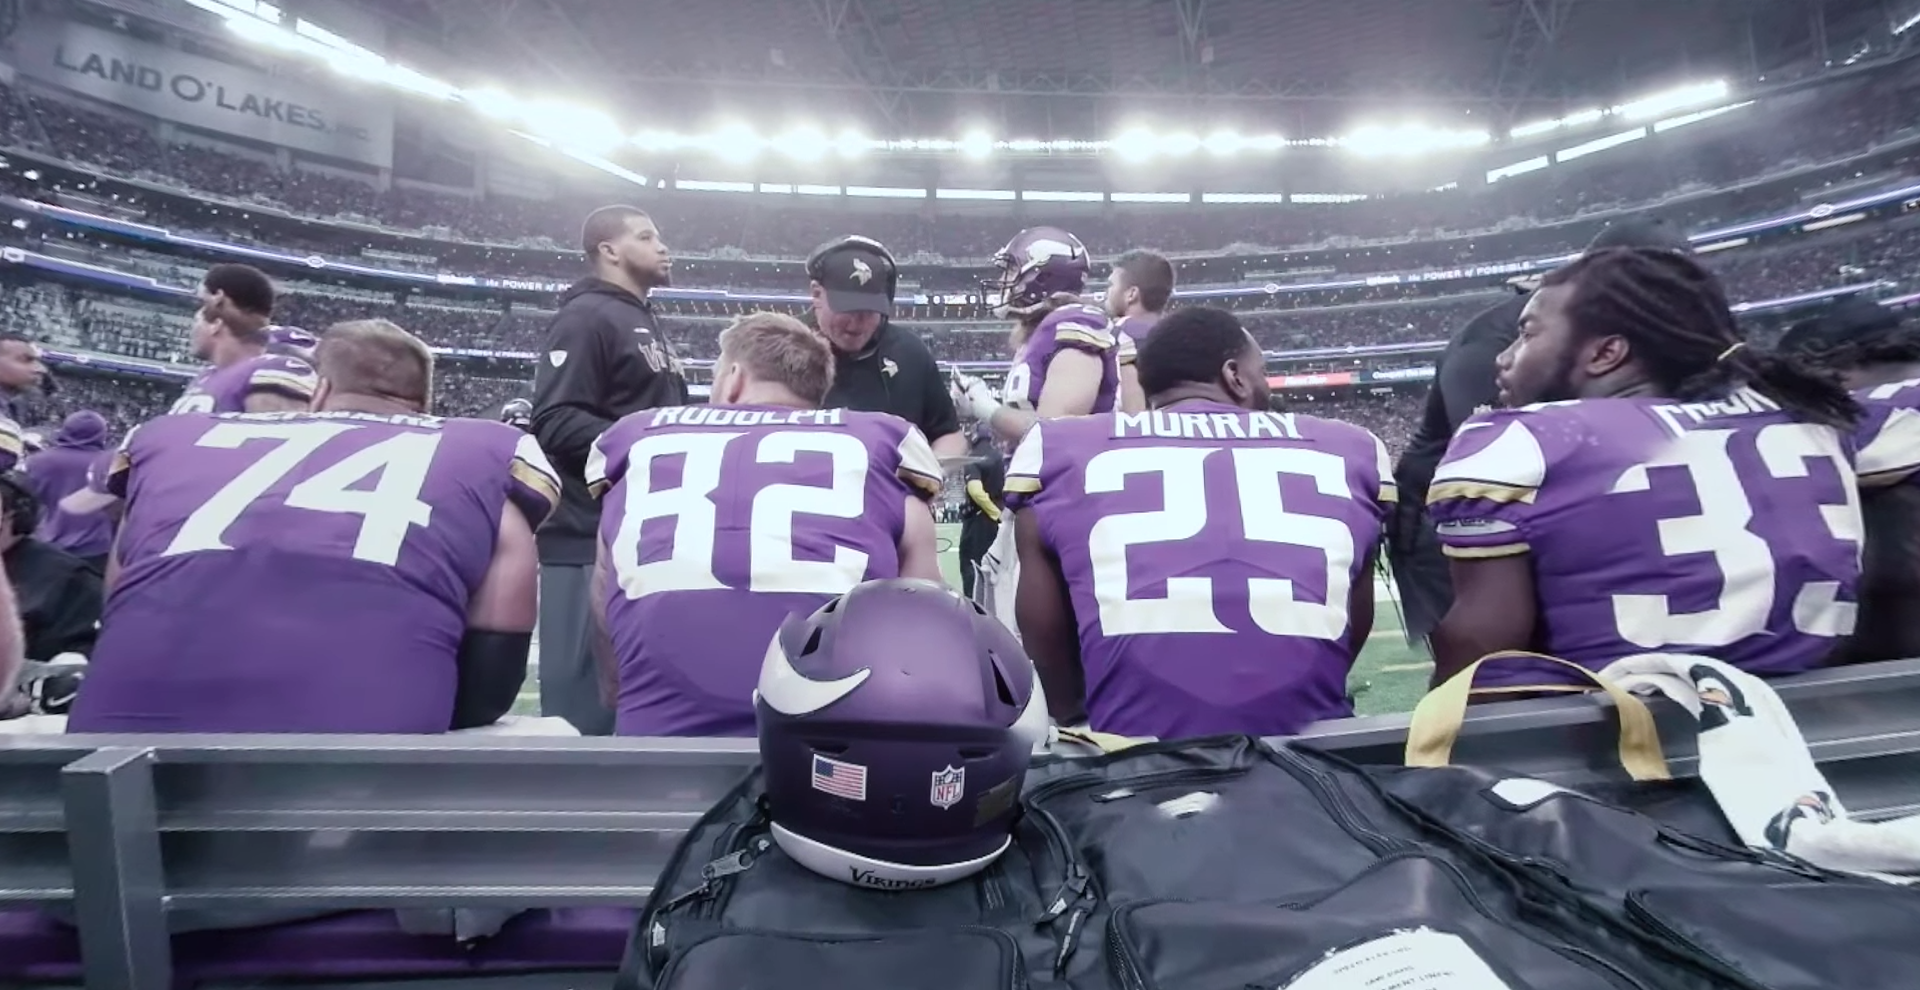 Minnesota Vikings putting together plays during the game. Photo by: Minnesota Vikings